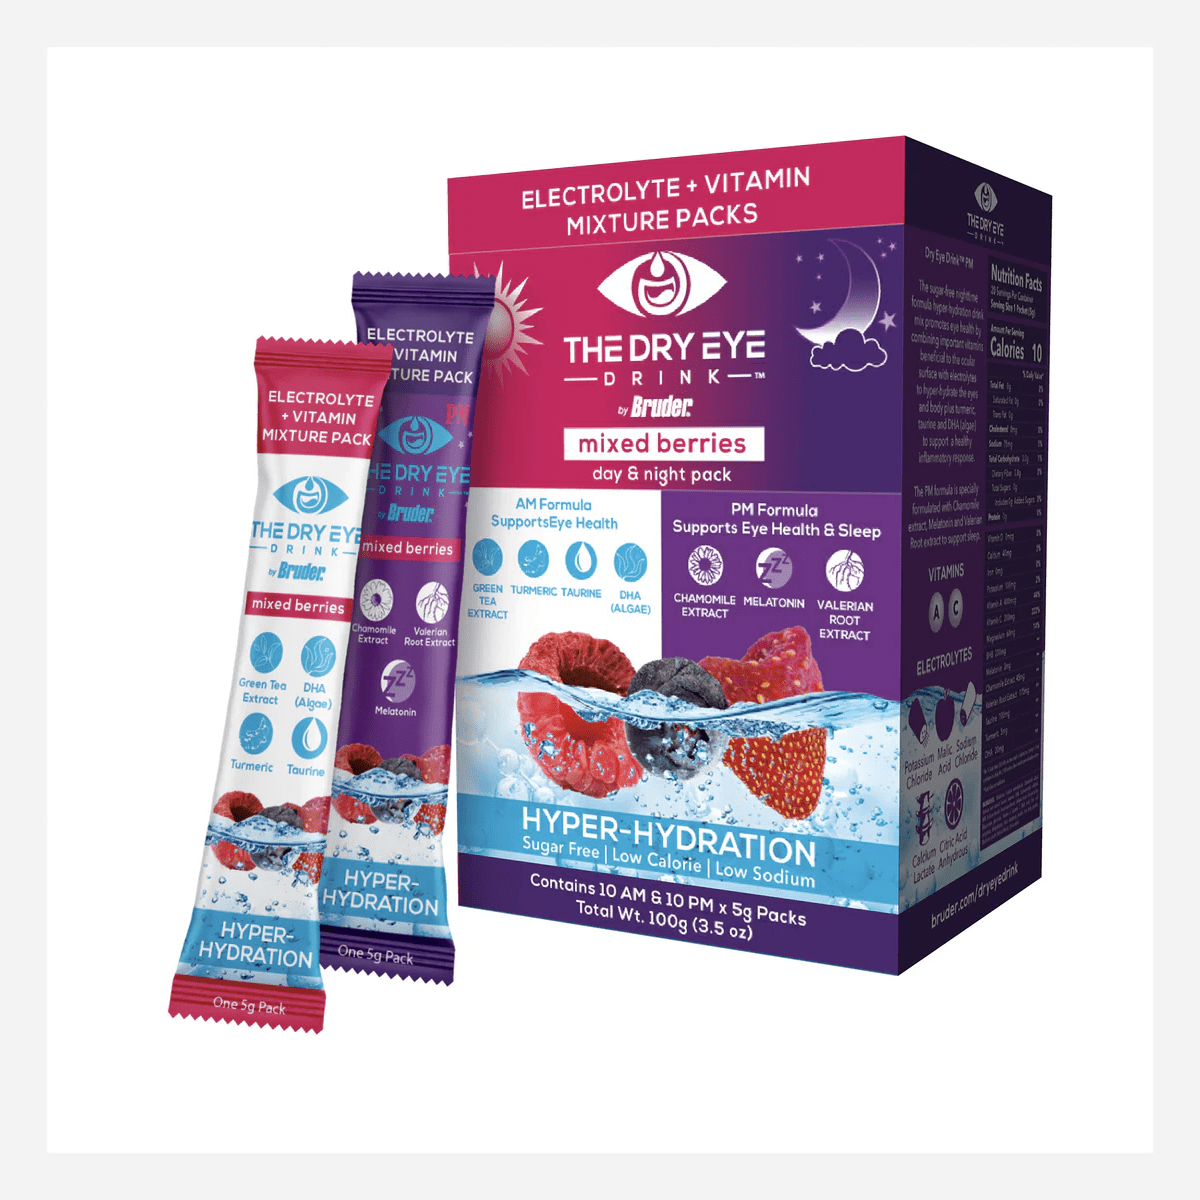 The Dry Eye Drink the Ultimate Hydration for Dry Eyes, Sugar-Free Electrolyte Powder Packets, Blended with Vitamins, Green Tea, Turmeric, Taurine, and Omega 3 (20 Packets of Mixed Berry AM/PM) - Dryeye Rescue